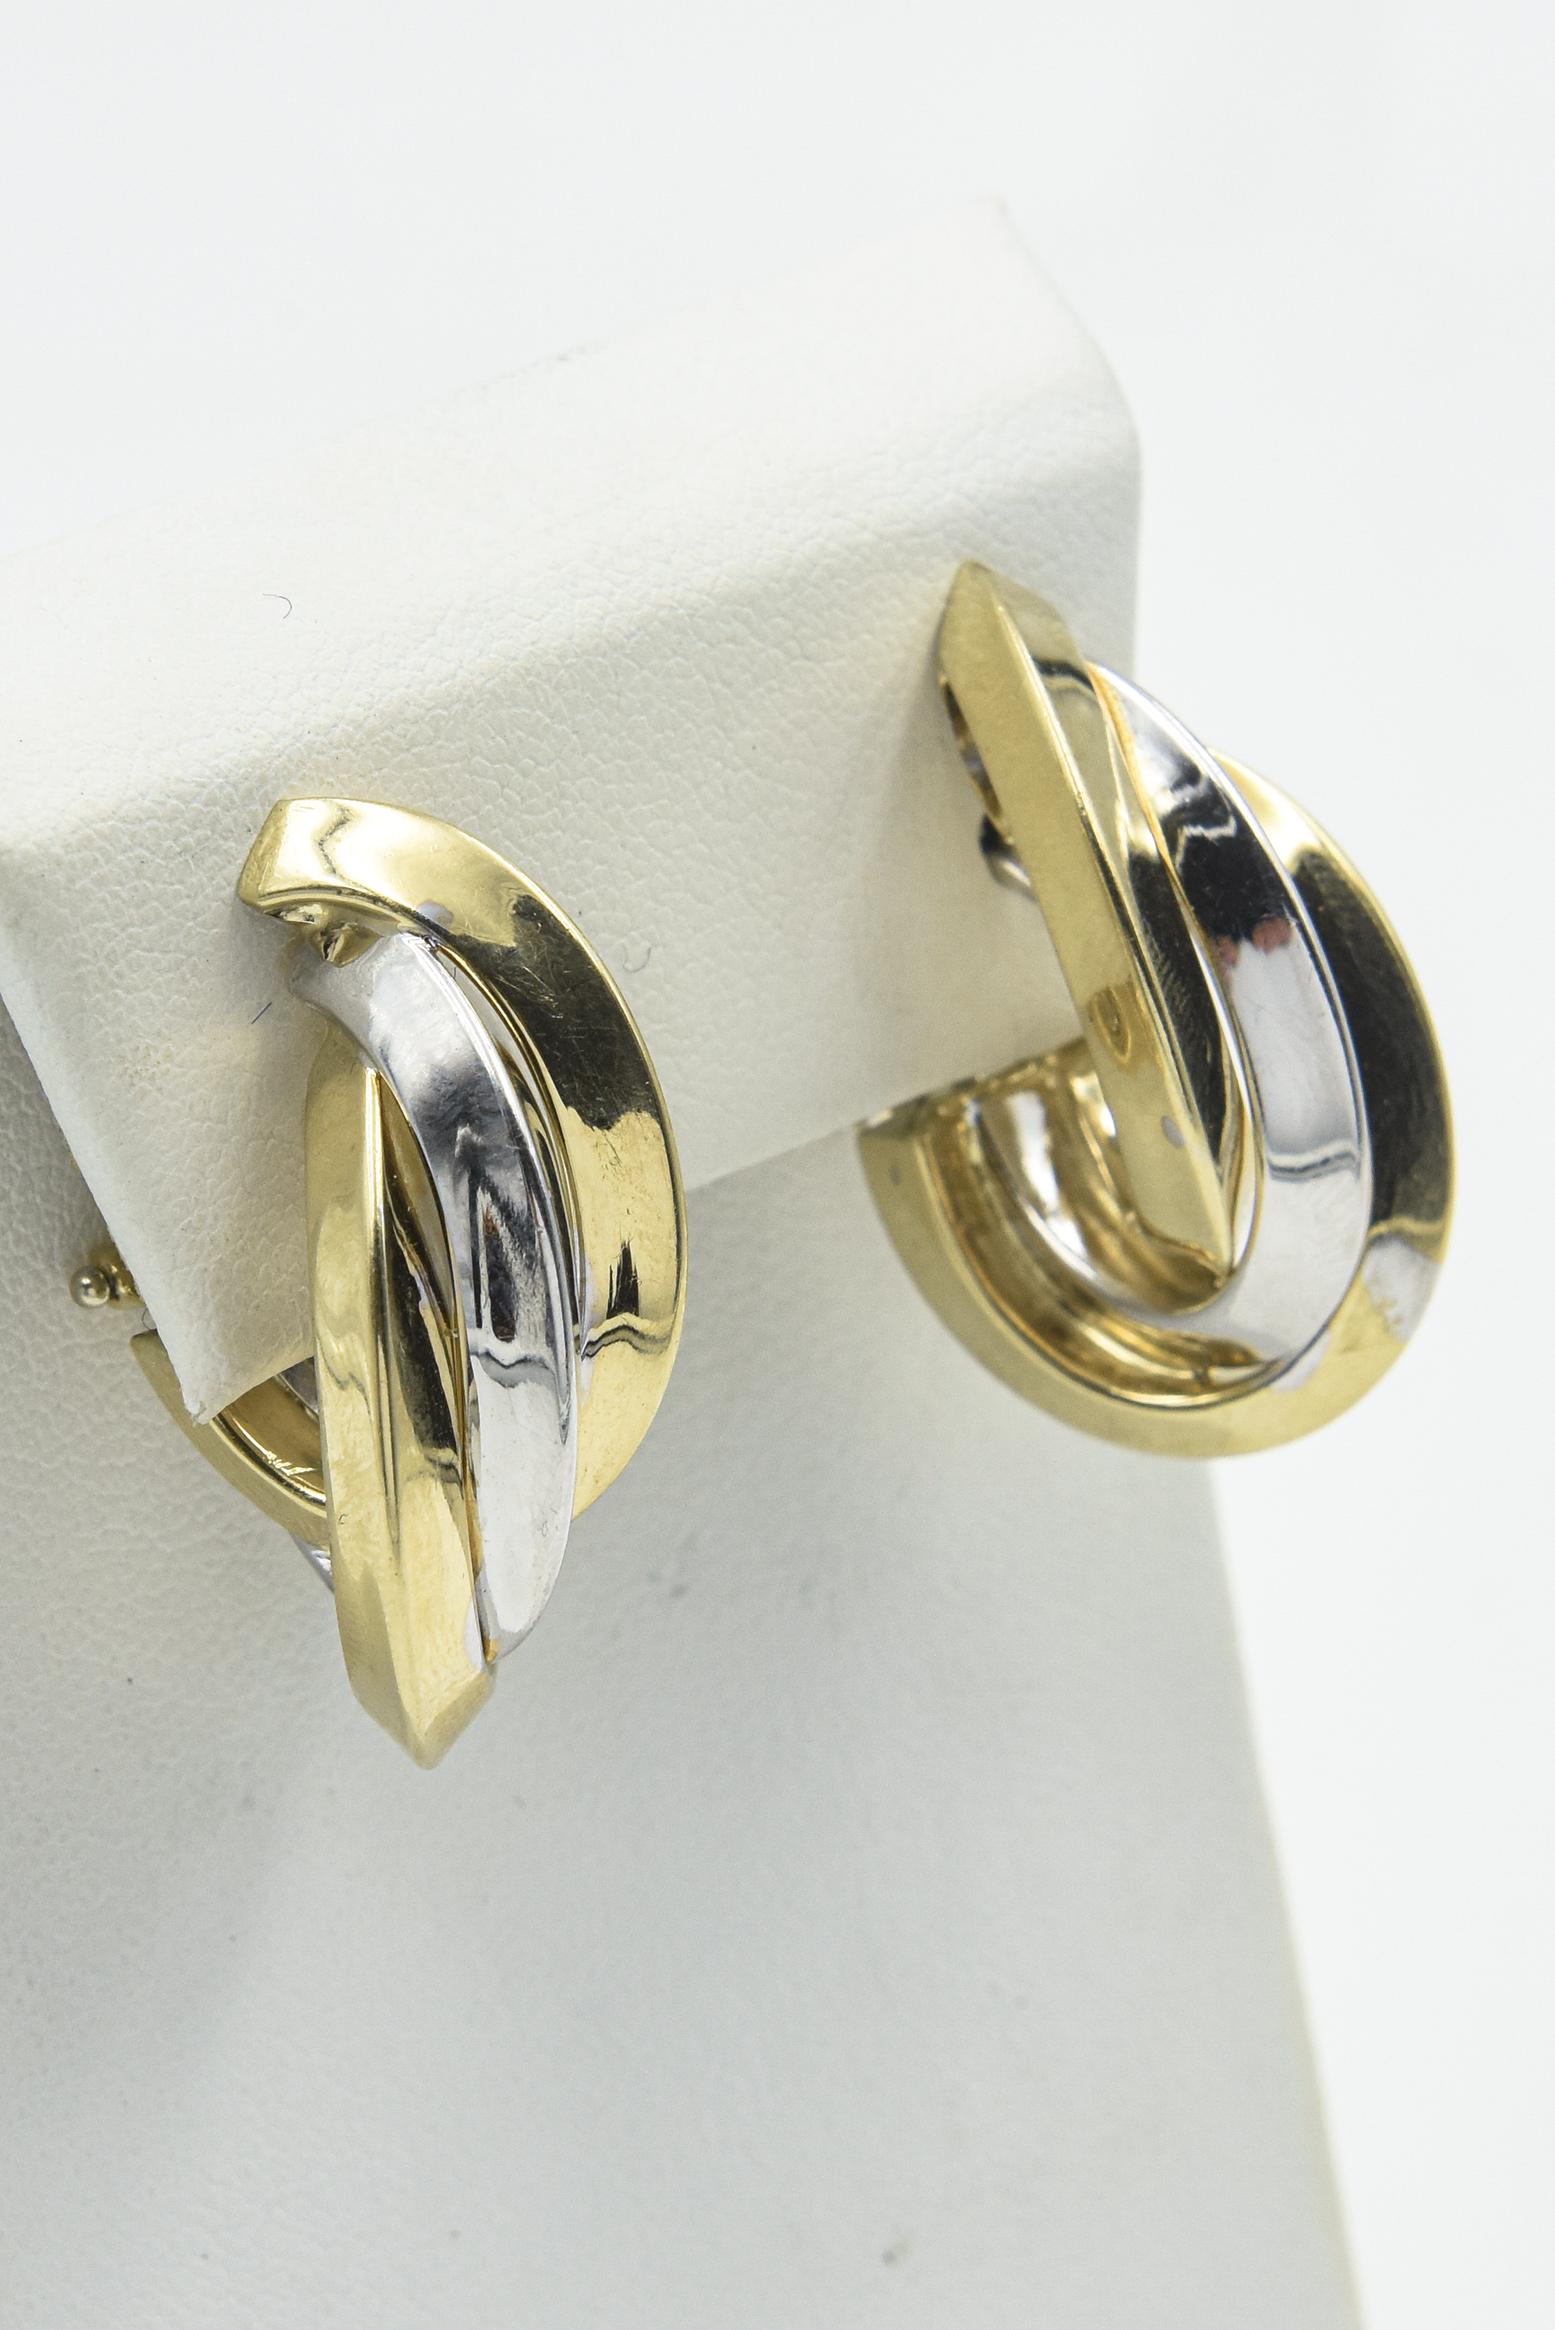 Fabulous vintage 14k yellow and white gold entwined hoop earrings featuring two yellow gold hoops with a white gold center hoop.   They are a substantial size measuring 1.30